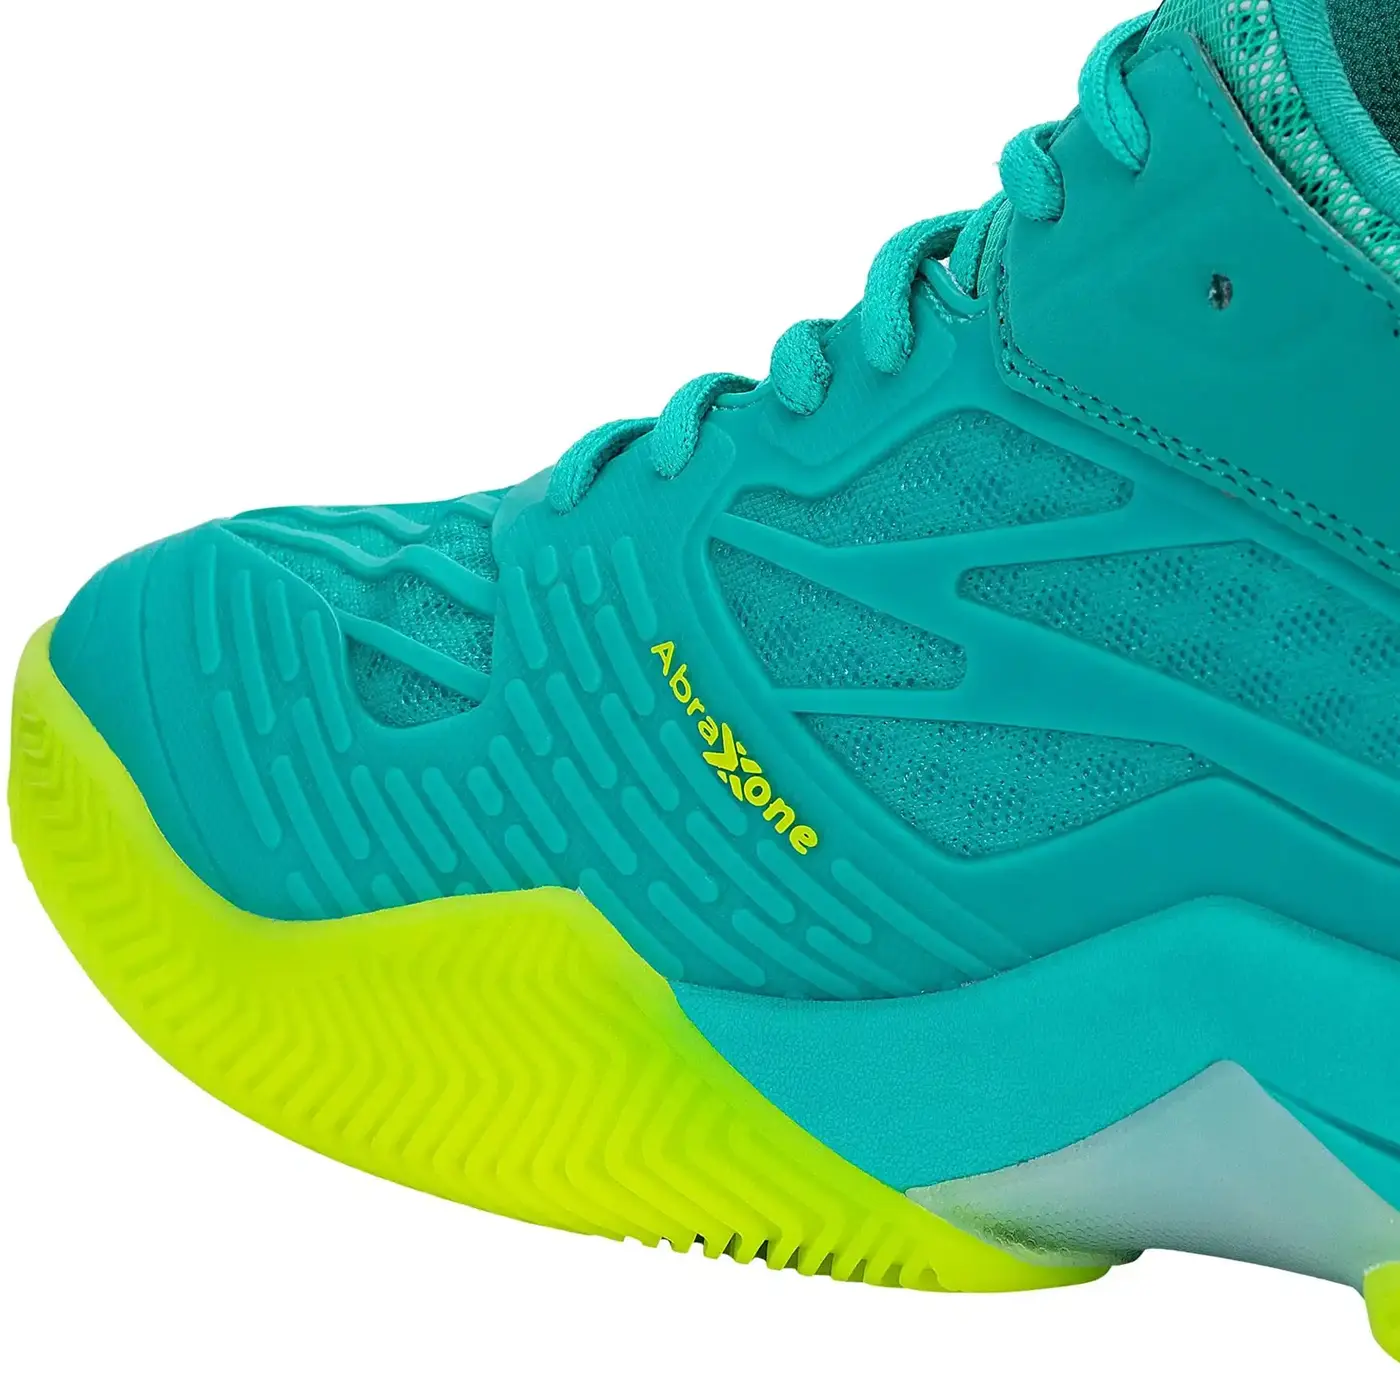 NOX AT10 LUX TurquoiseLime Padel Shoes Image 6